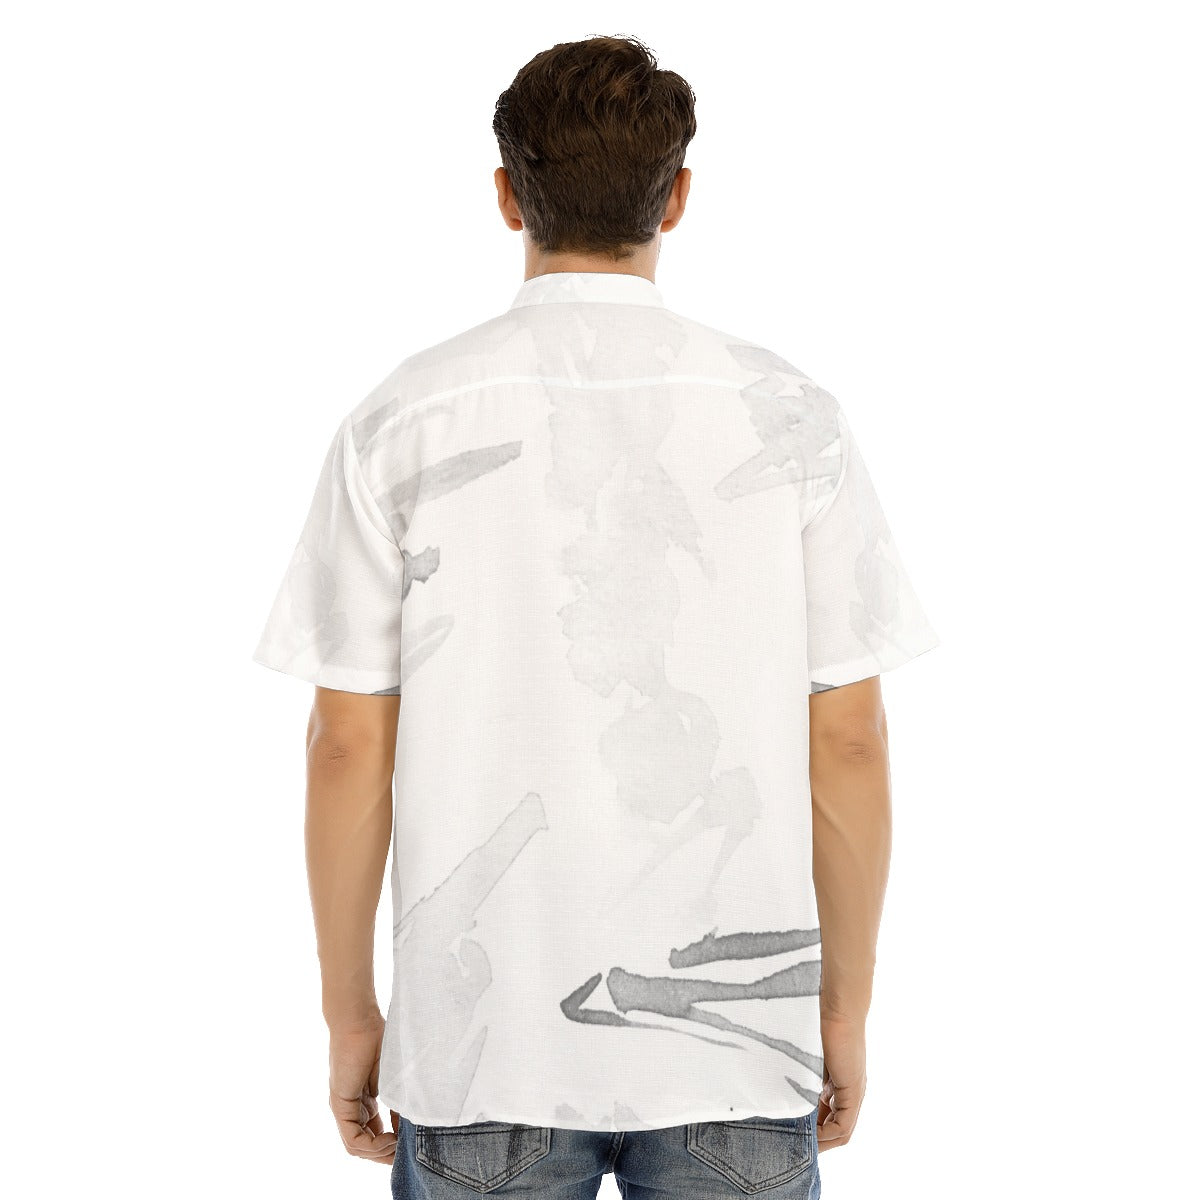 Men's All Over Print Stand-up Collar T-shirt